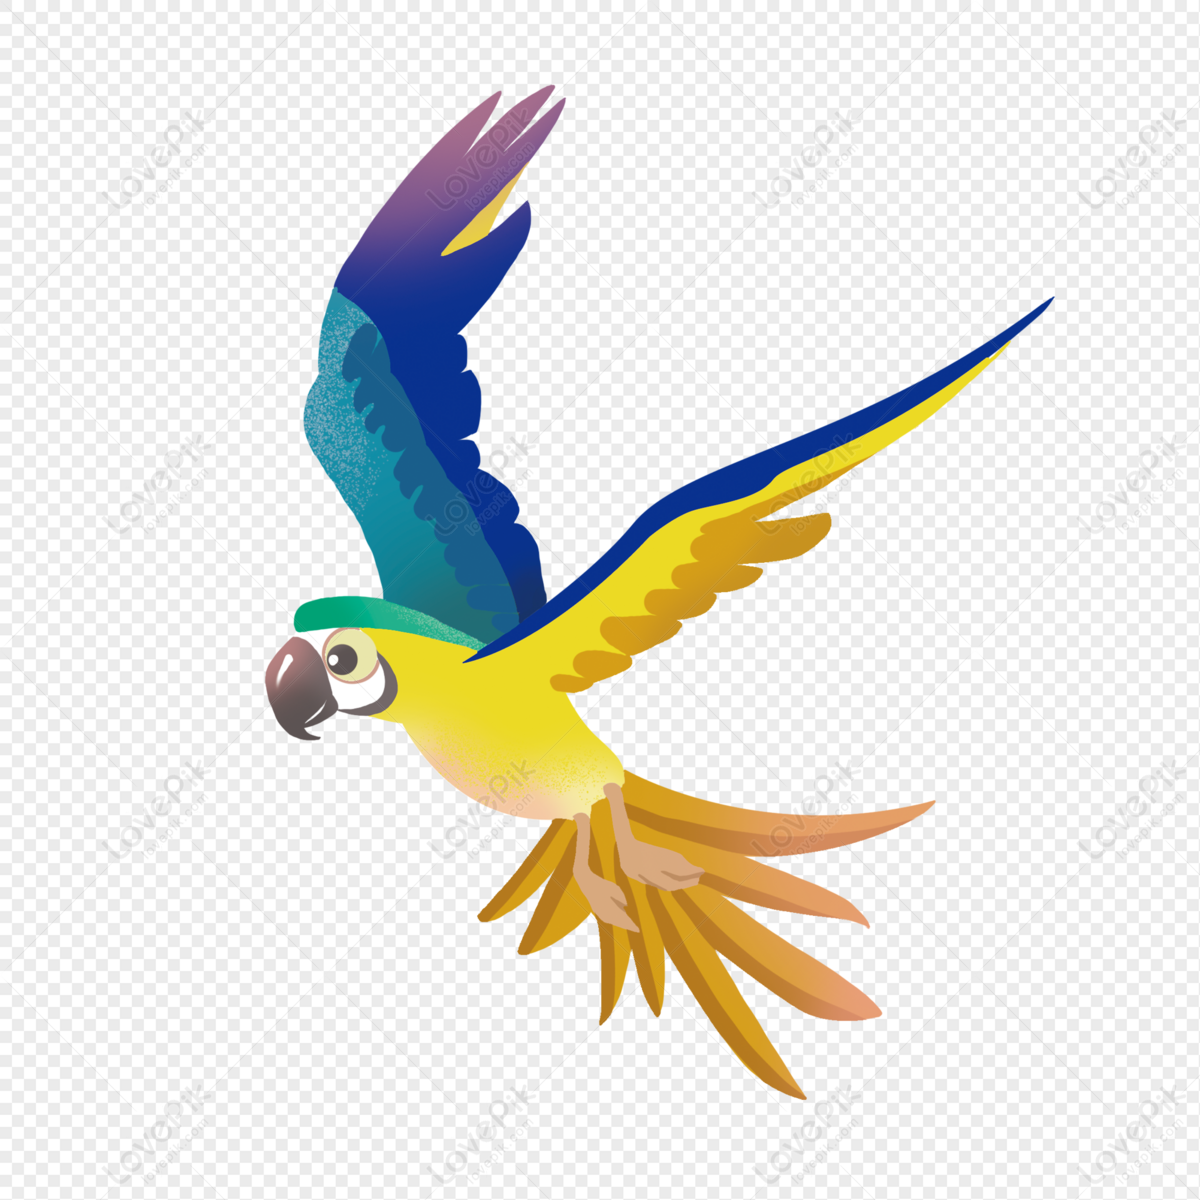 Cartoon Parrot PNG Picture And Clipart Image For Free Download - Lovepik |  401533015